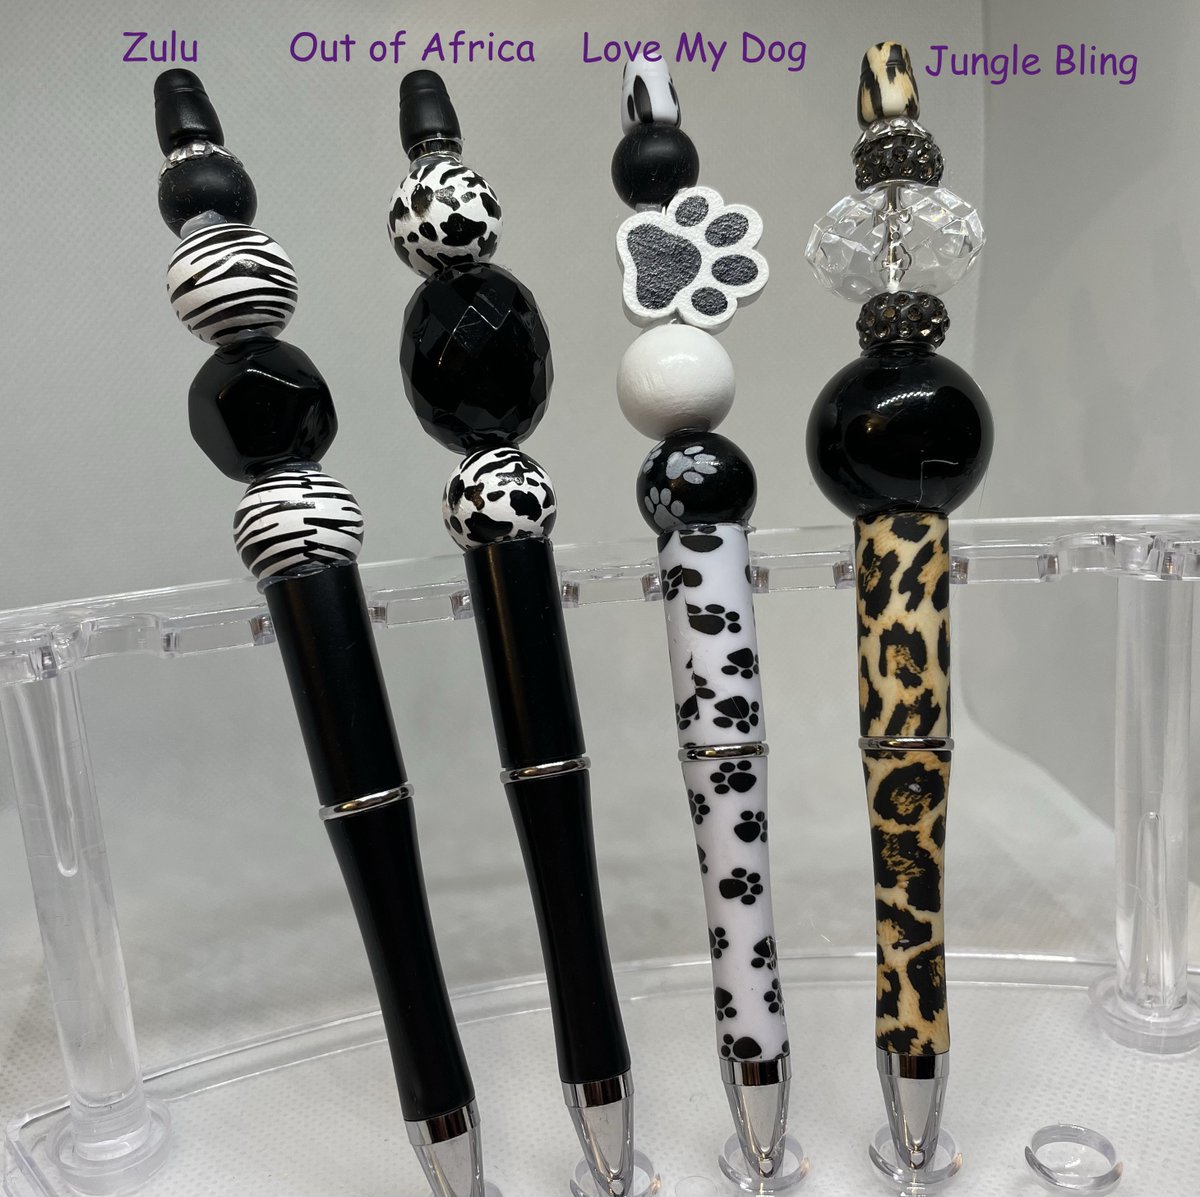 The Animal Lovers  Beaded PenCollection is here! Which one is yours? Available at desihandmade.myshopify.com
#uniquegiftideas #dogslife #giftsforher #giftsforfriends #writing #penart #handmadegifts #giftideas #giftideasforher #giftsforfriends #teachergifts #animallover